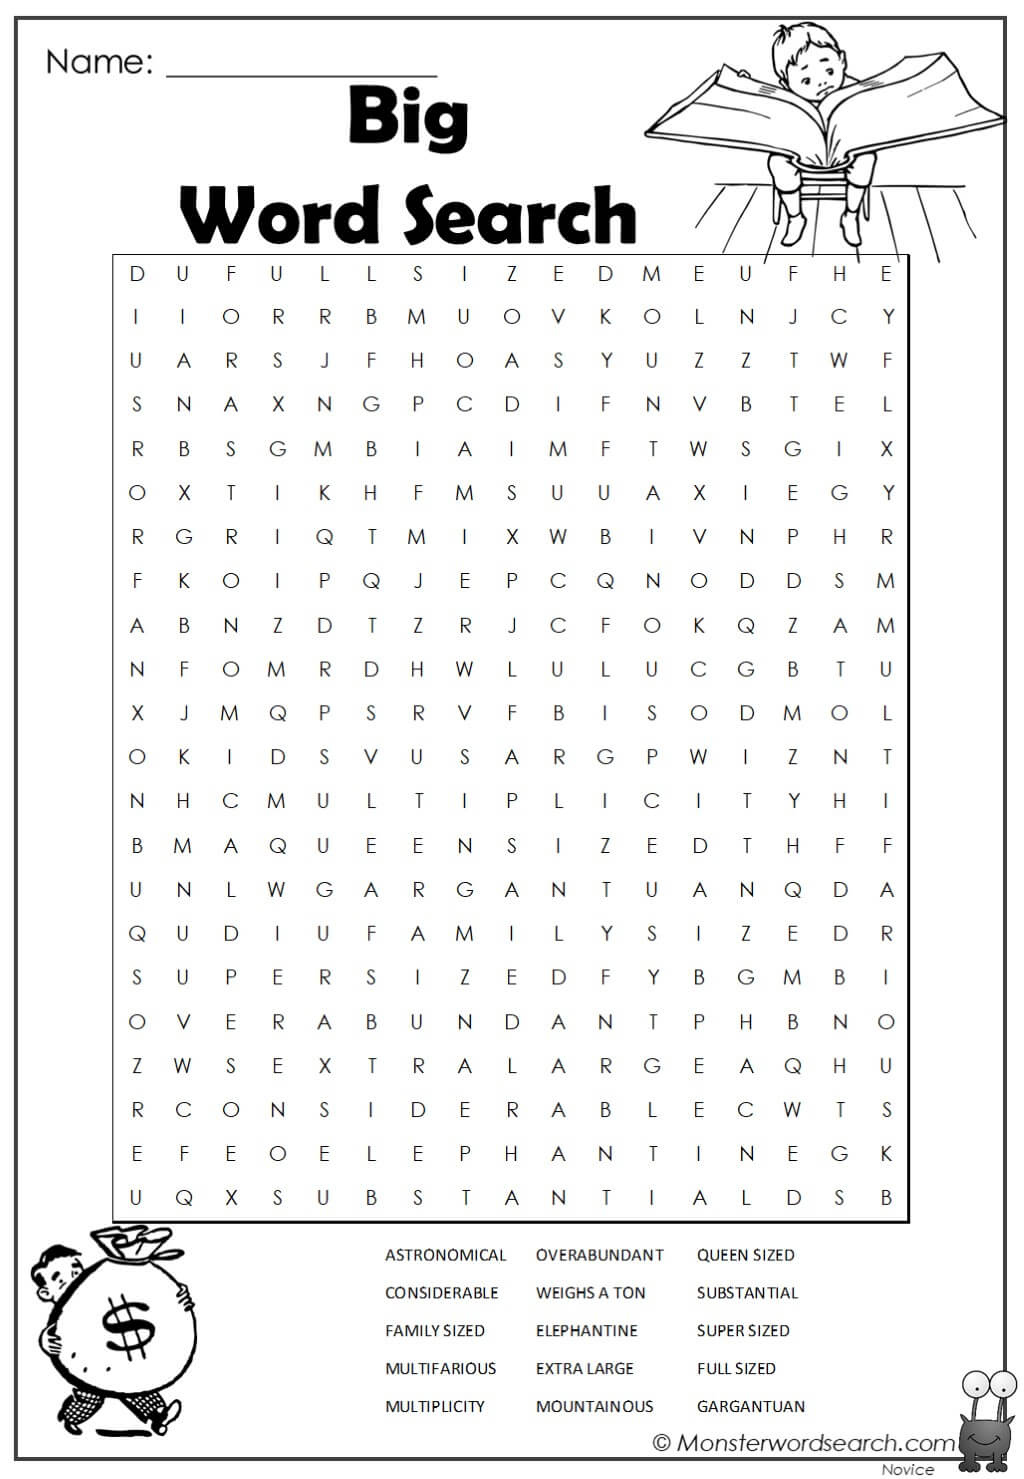 Big Word Search 1 jpg Monster Word Search